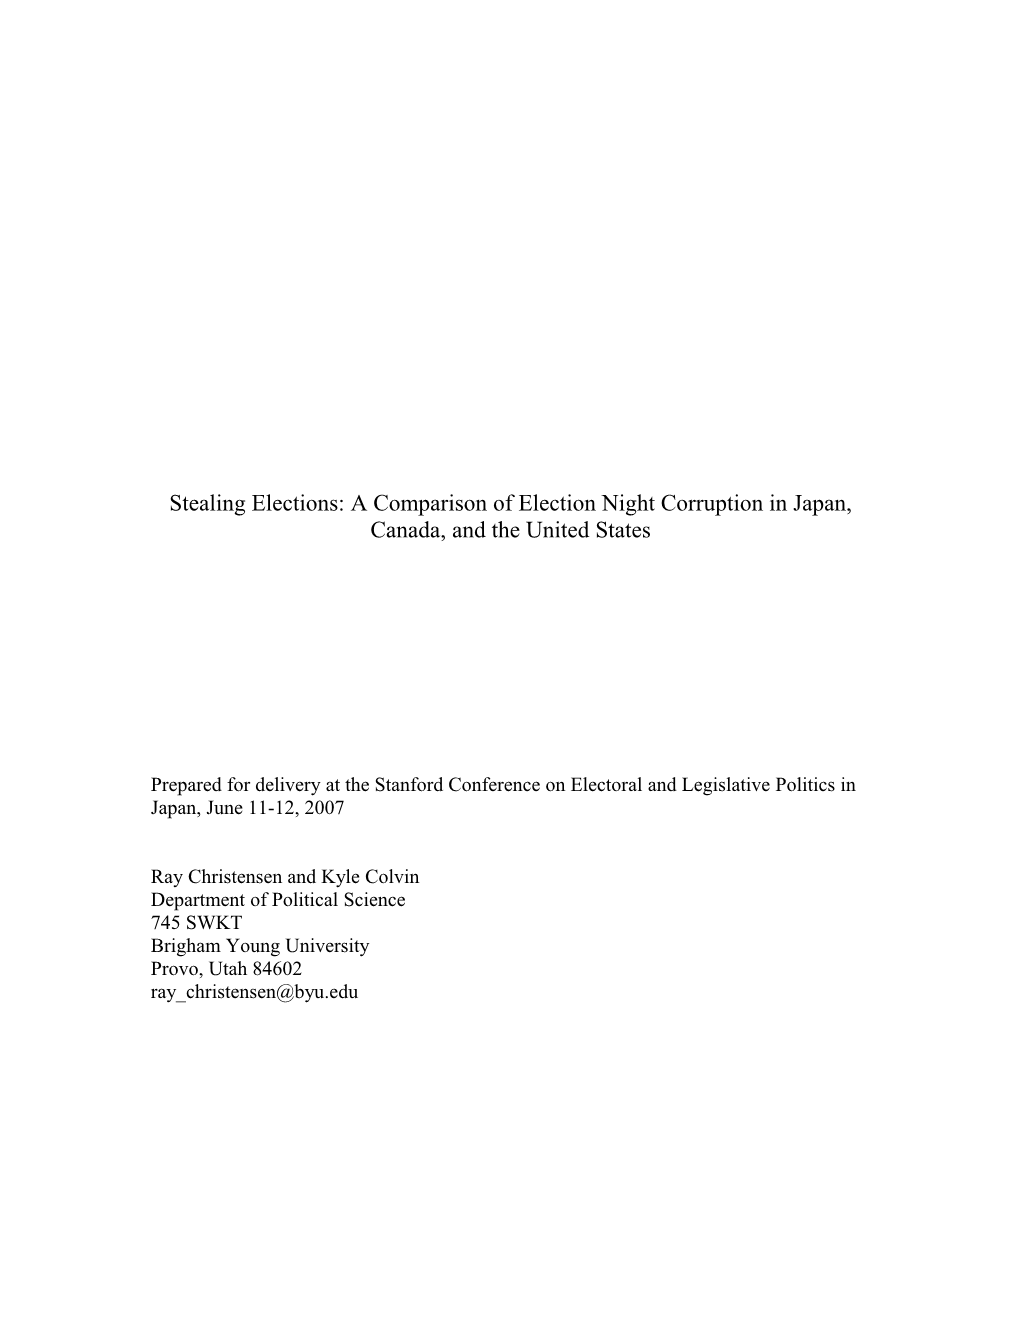 Stealing Elections: a Comparison of Election Night Corruption in Japan, Canada, and The